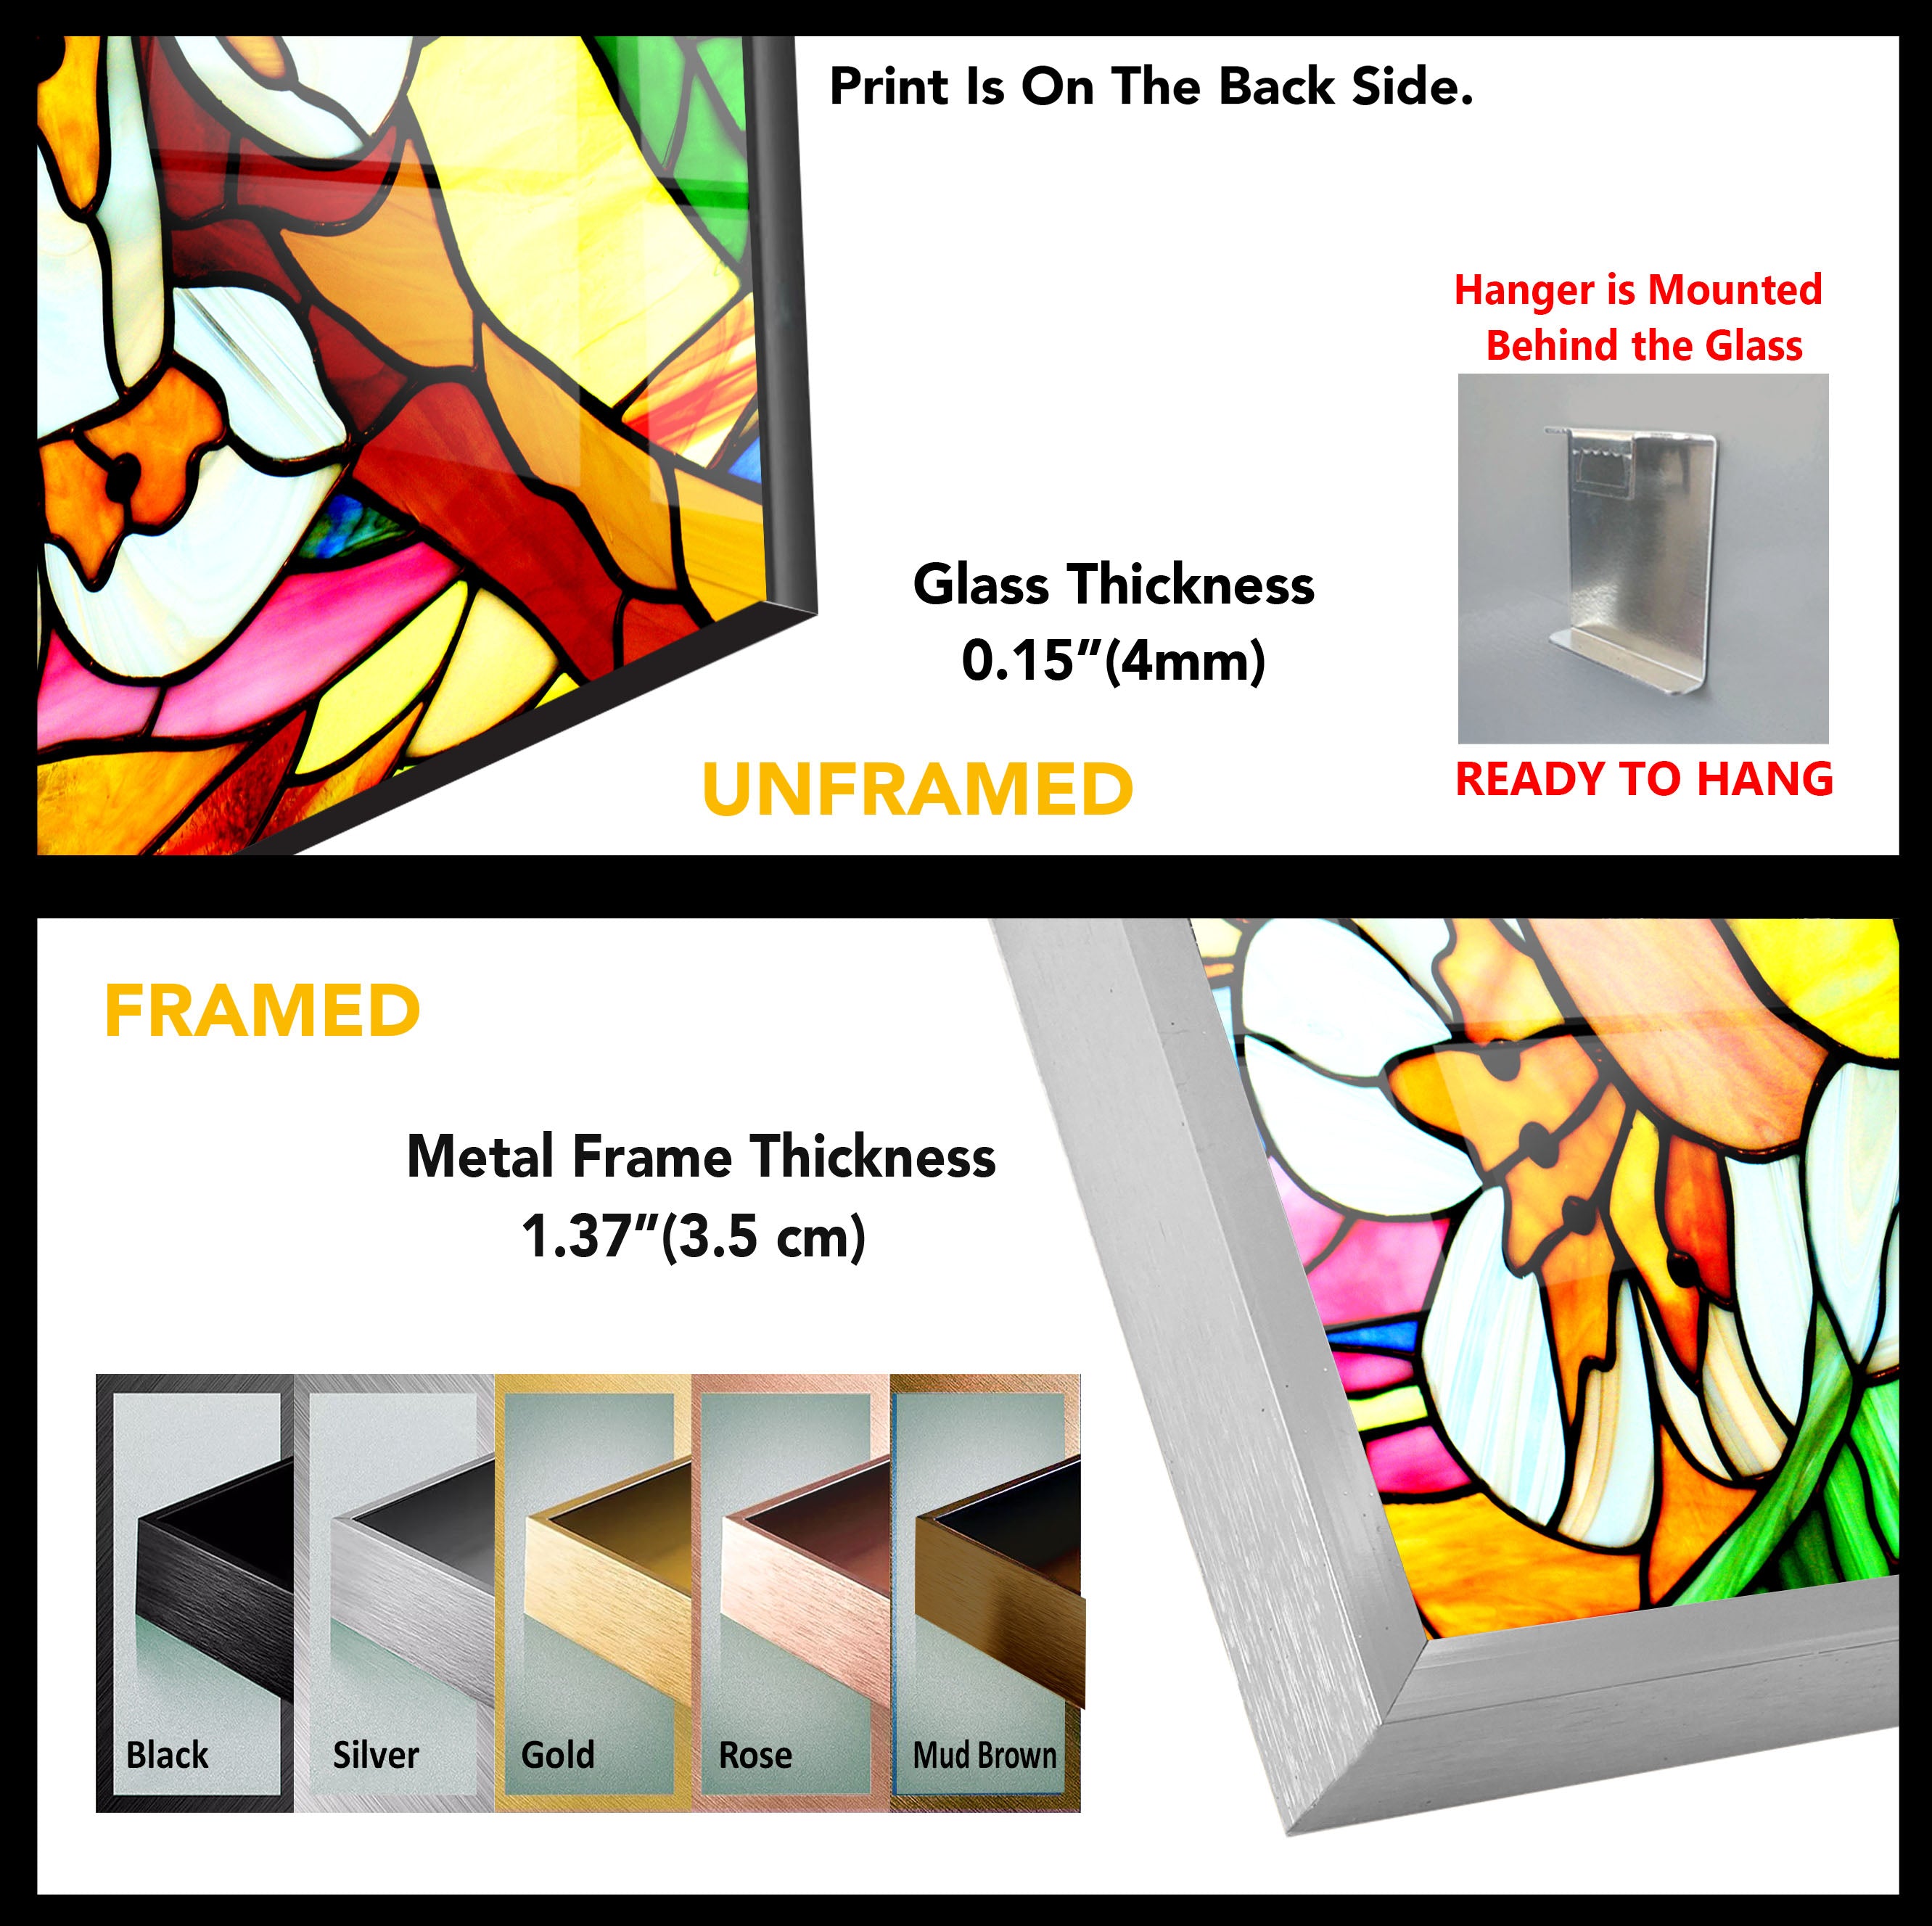 Abstract Colorful Flower Tempered Glass Wall Art